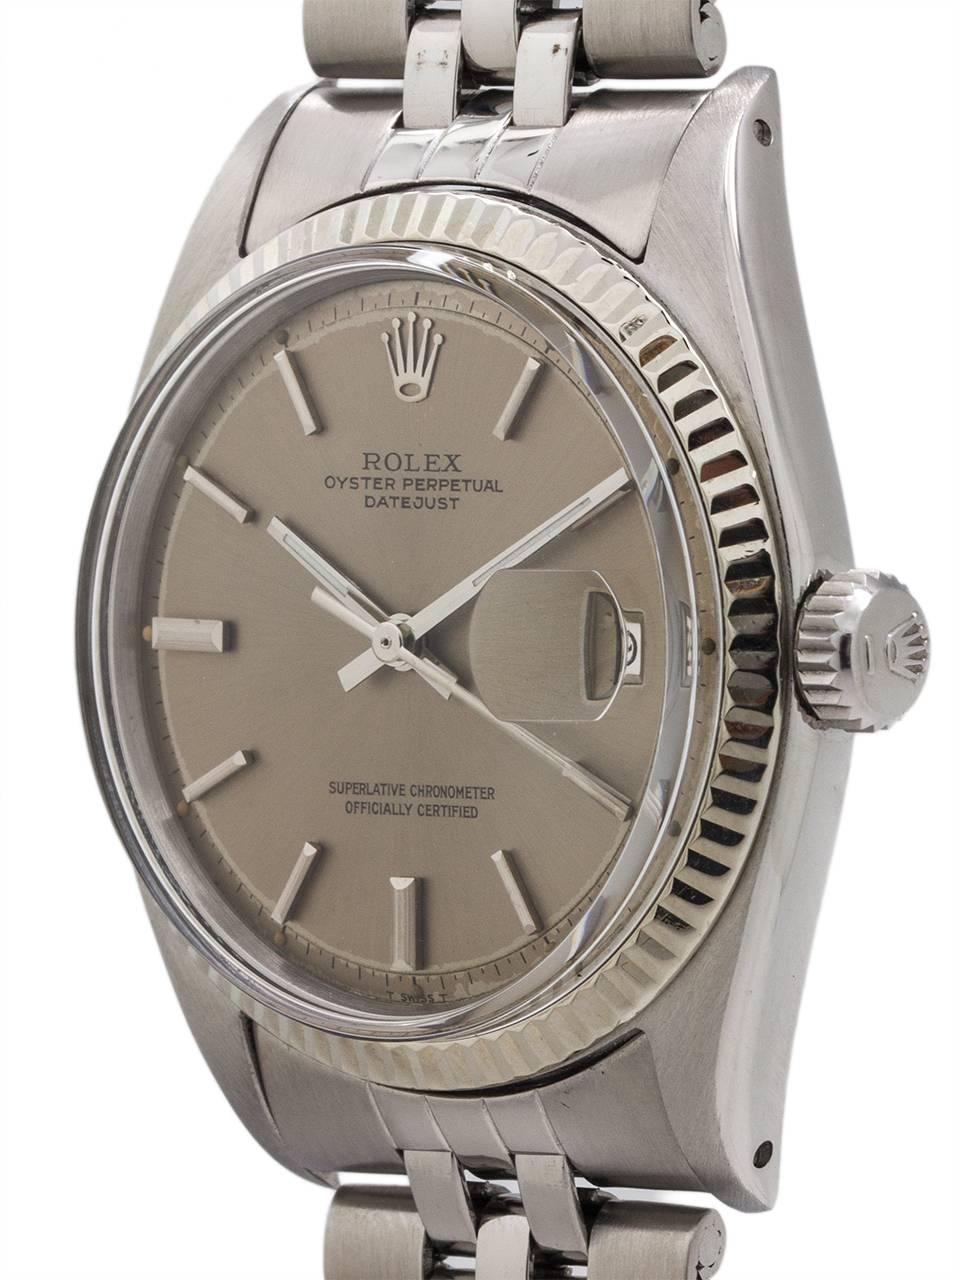 
Rolex Stainless Steel Datejust ref # 1601 serial# 1.7 million circa 1968. 36mm diameter case with 14K white gold fluted bezel and acrylic crystal. Original silver/grey satin pie pan dial with applied silver indexes and silver baton hands. Powered